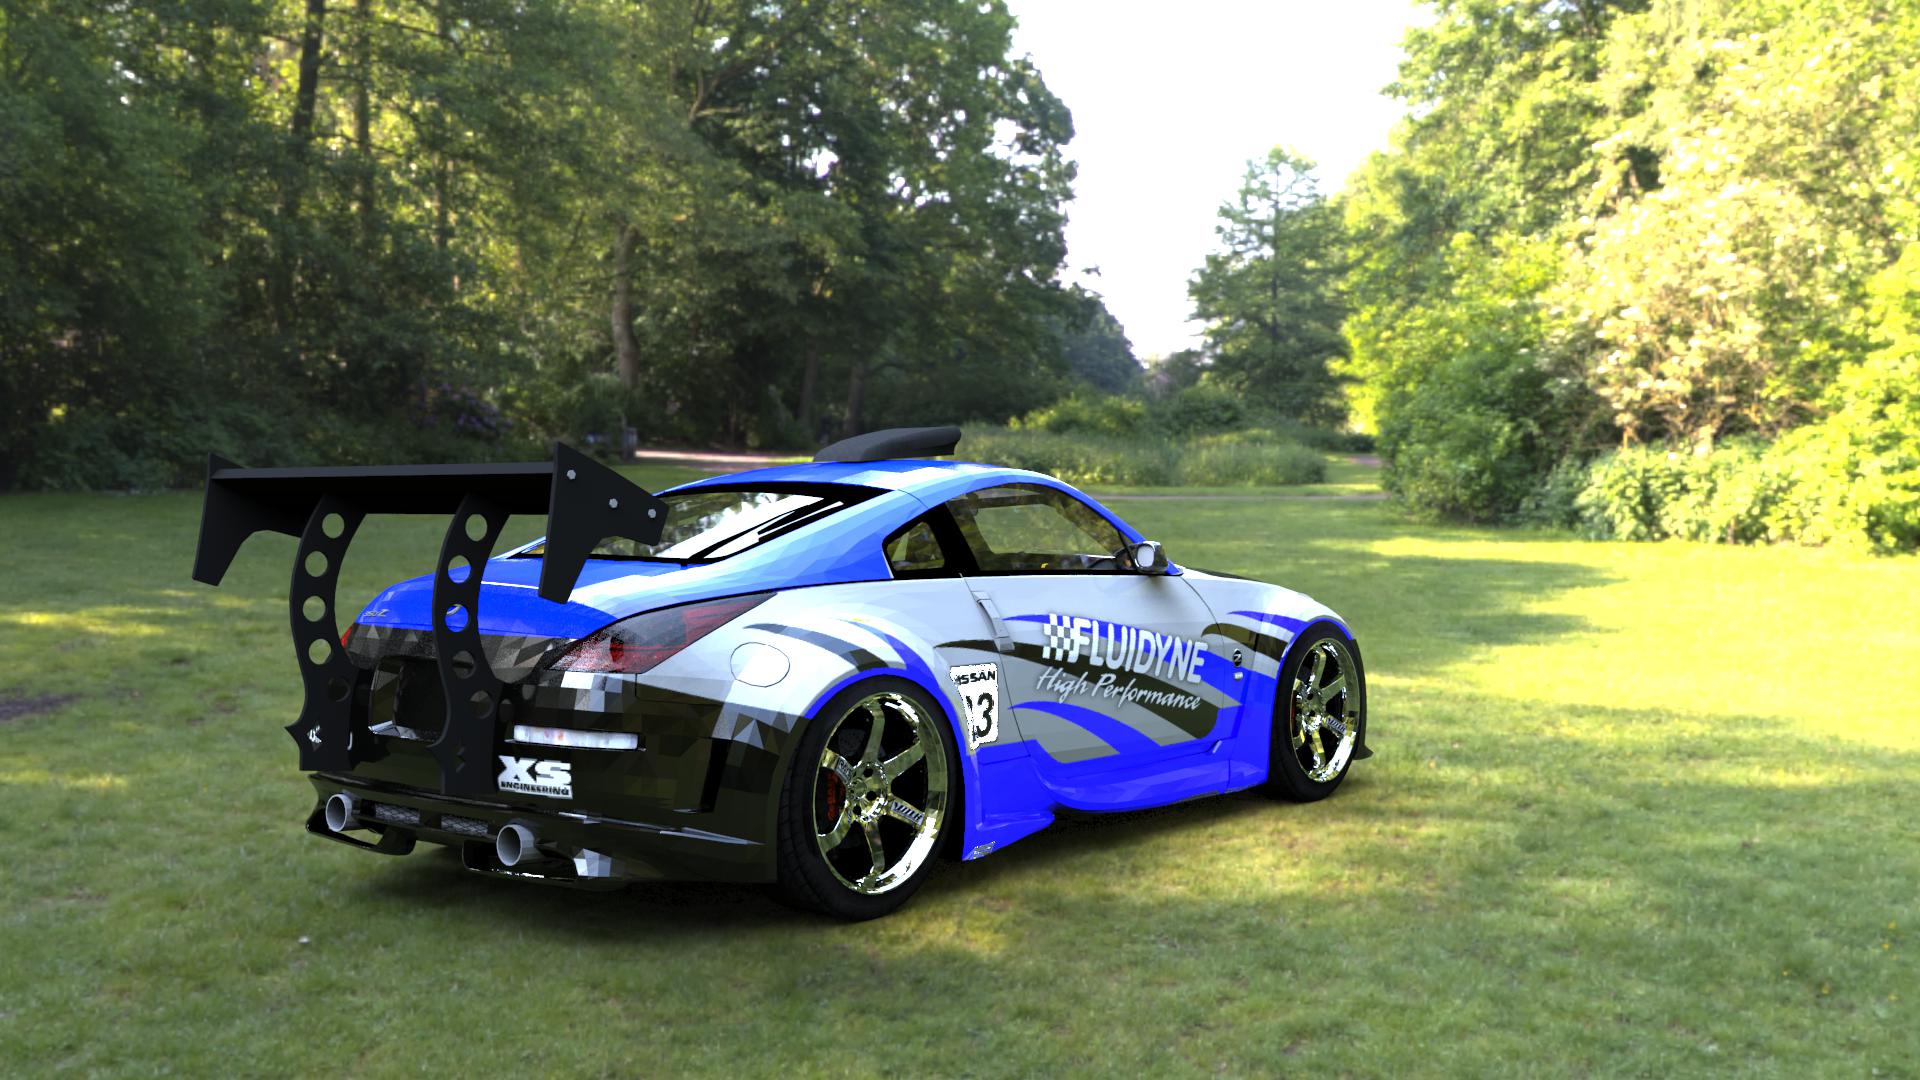 Nissan 350Z Need For Speed Video Games Vehicle Nissan Fairlady Z Nissan 1920x1080